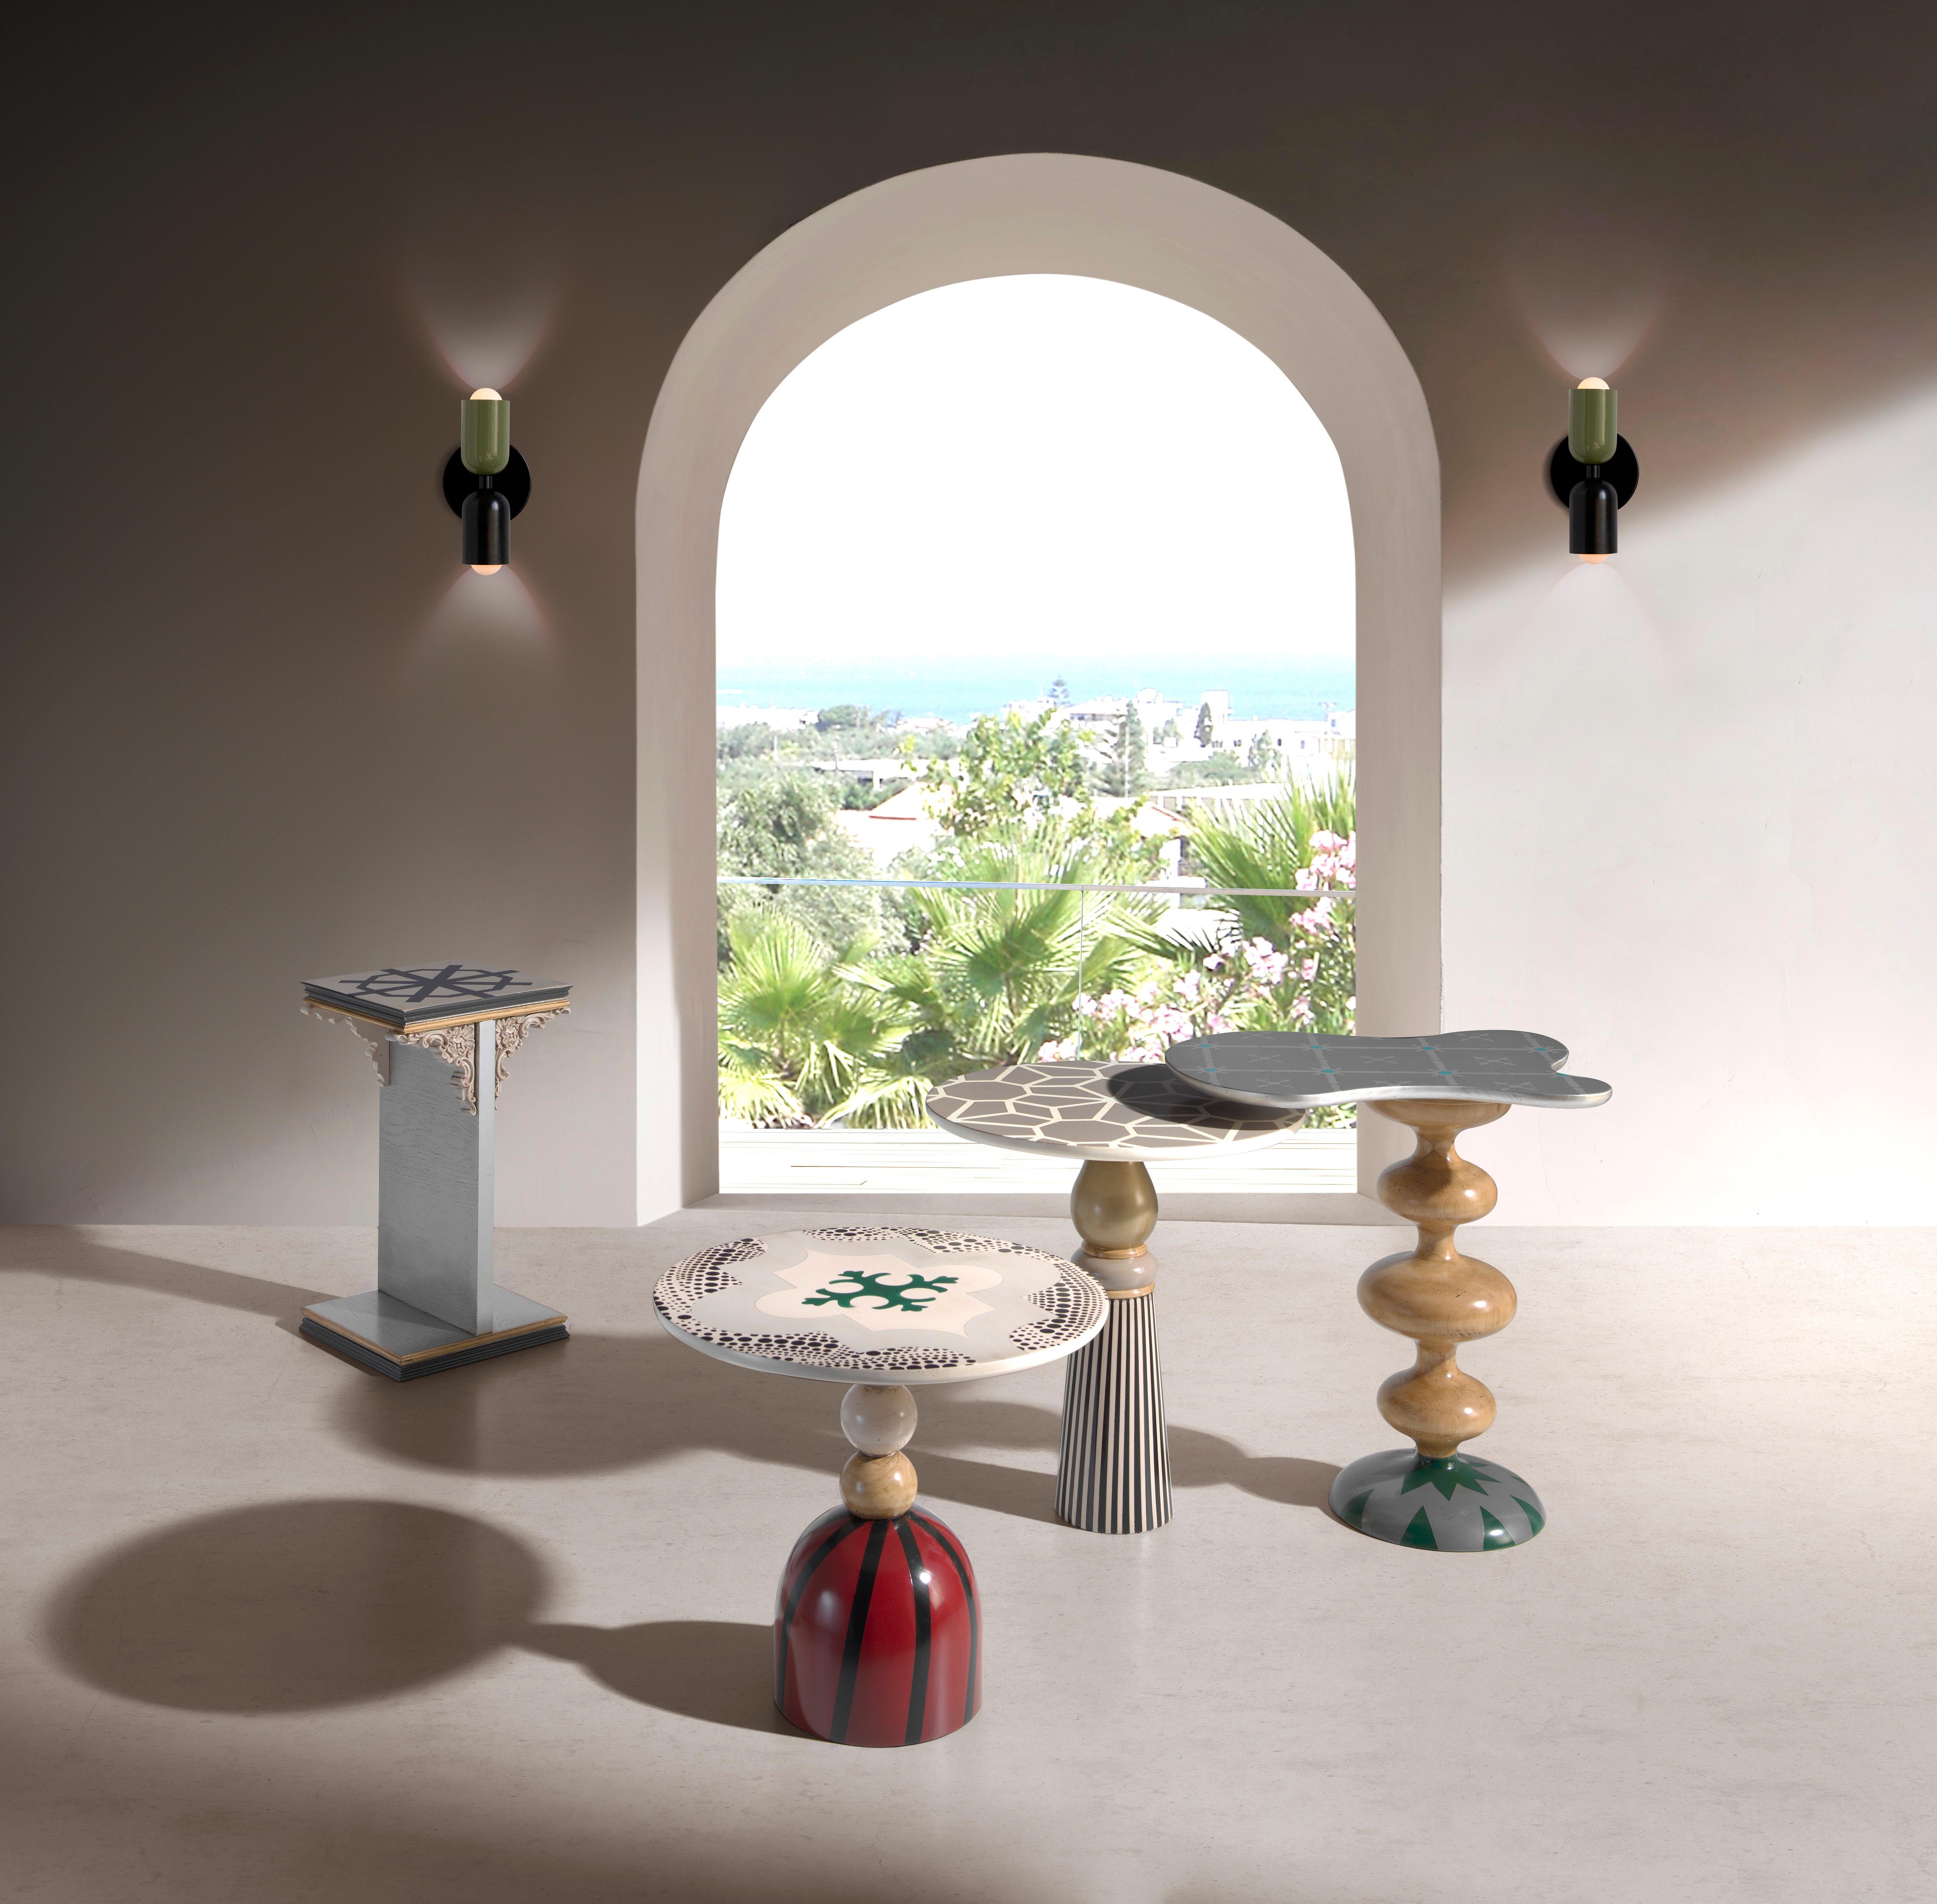 Bring a little piece of the Prado Museum to your home with these little tables inspired by the work of Diego Velázquez. Our artisans have used their original feet as a canvas to recreate the famous Meninas skirts, which in turn support an elegant